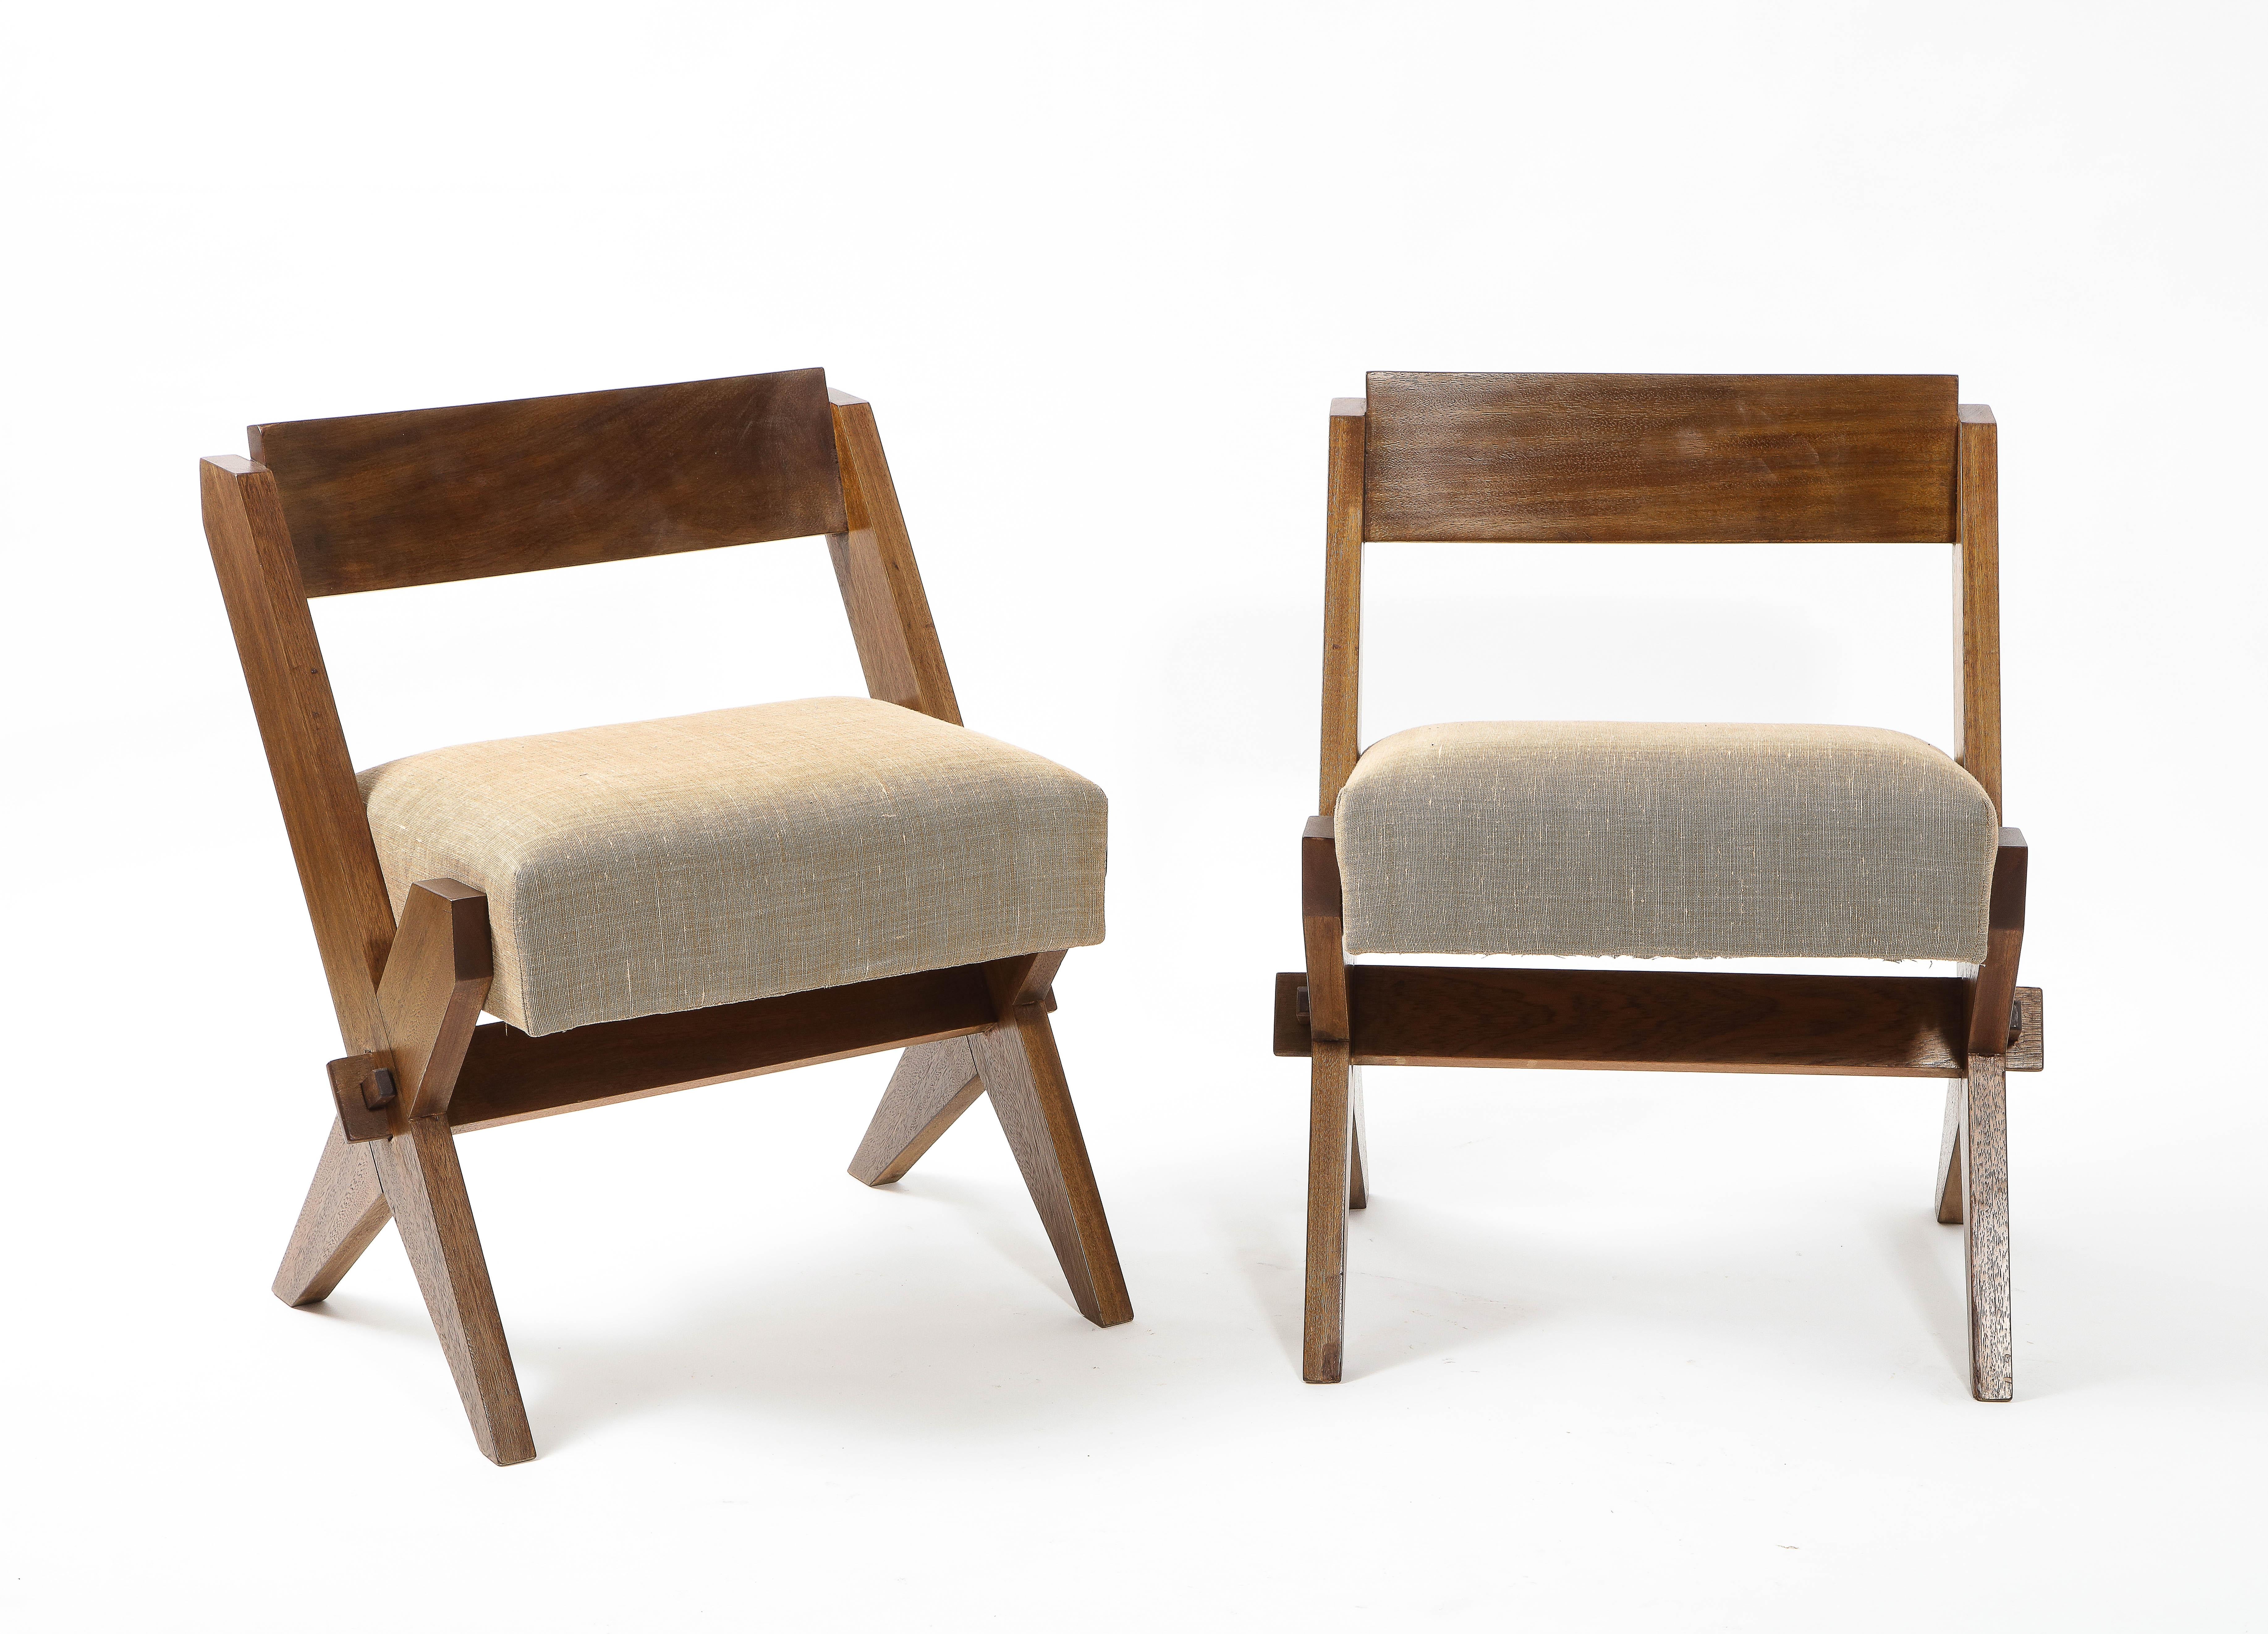 Pair of Reconstruction Small Solid Wood Scissor Leg Chairs, France 1950's For Sale 5